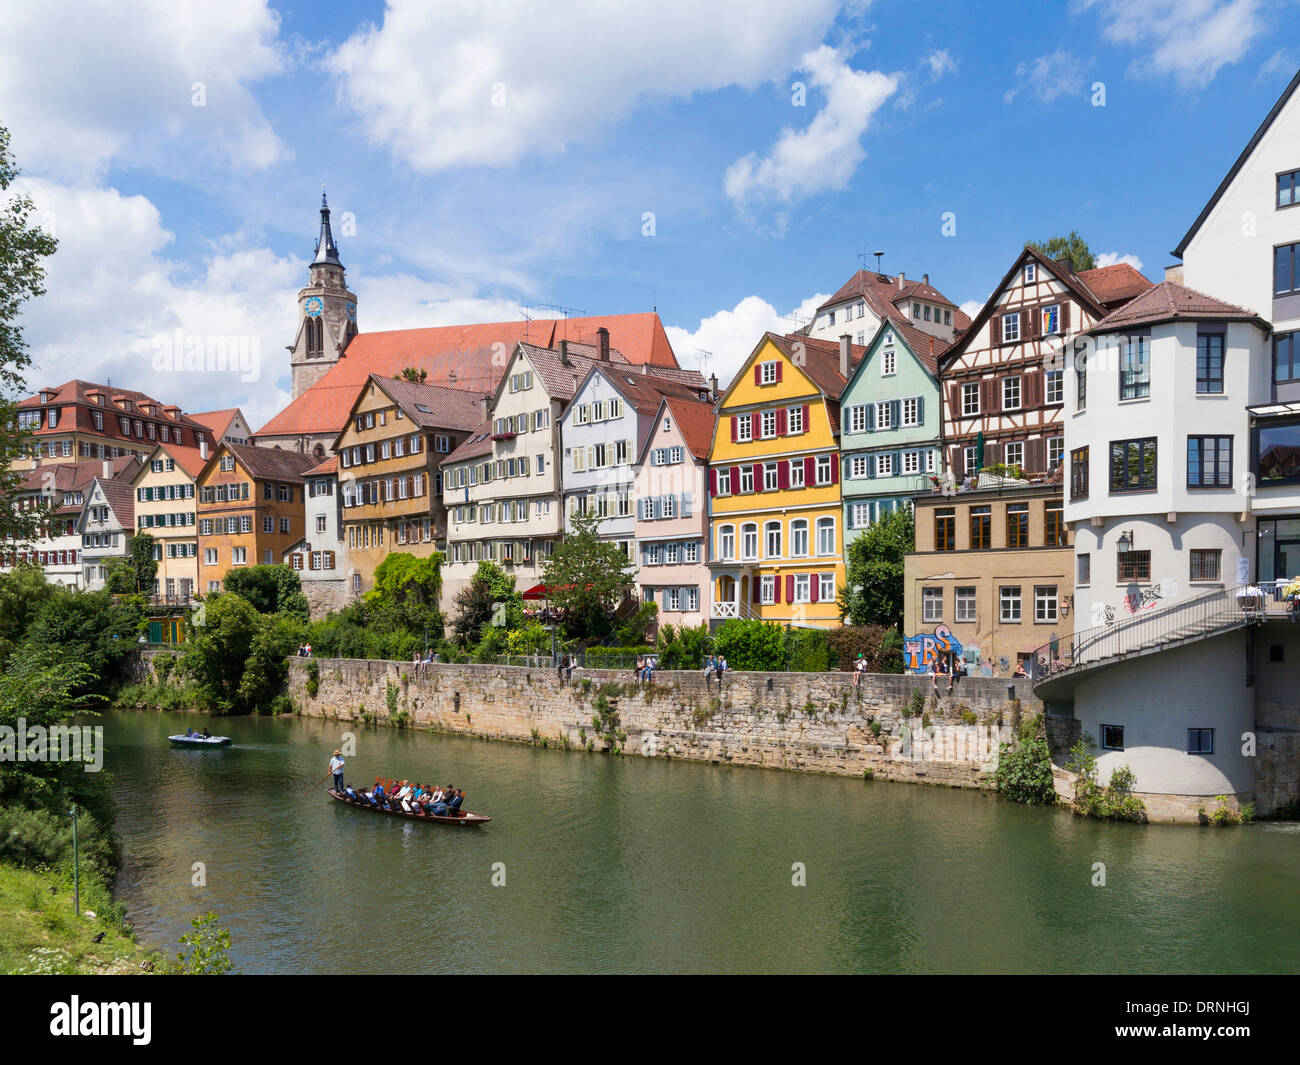 Germany - Tubingen, an old town on the River Neckar, Baden-Wurttemberg, Germany Stock Photo